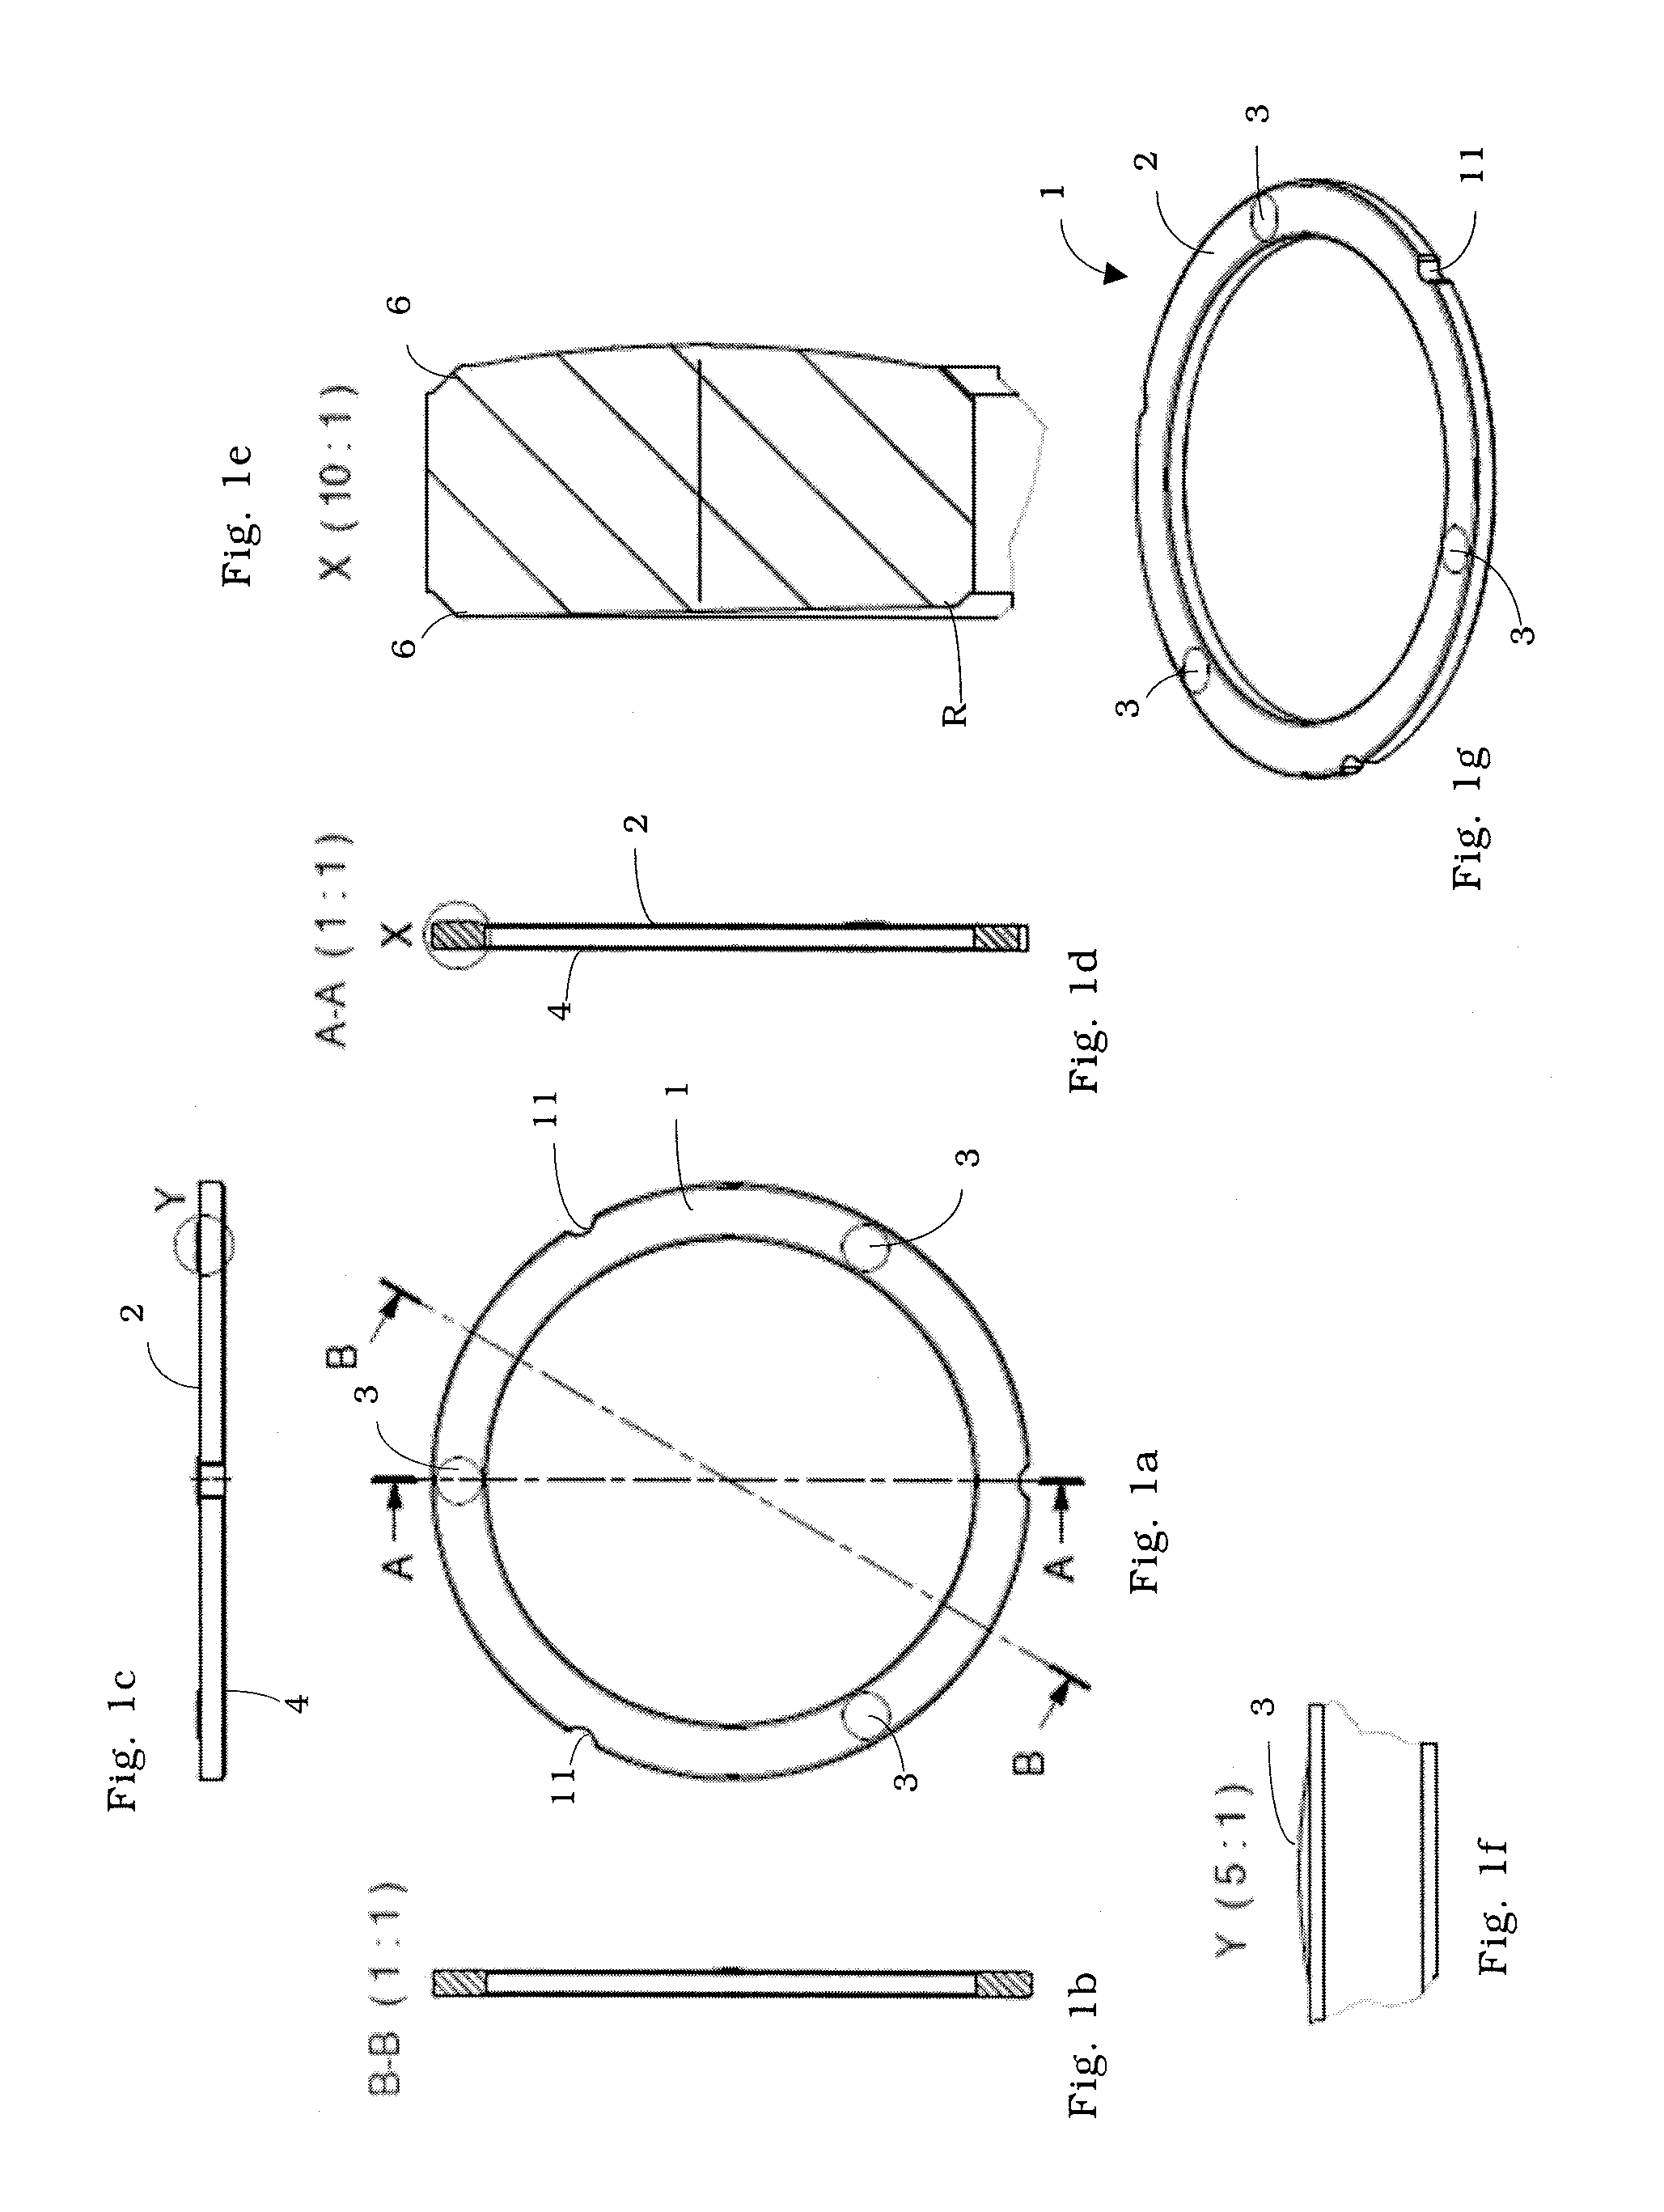 Separating device for removing sand and rock particles